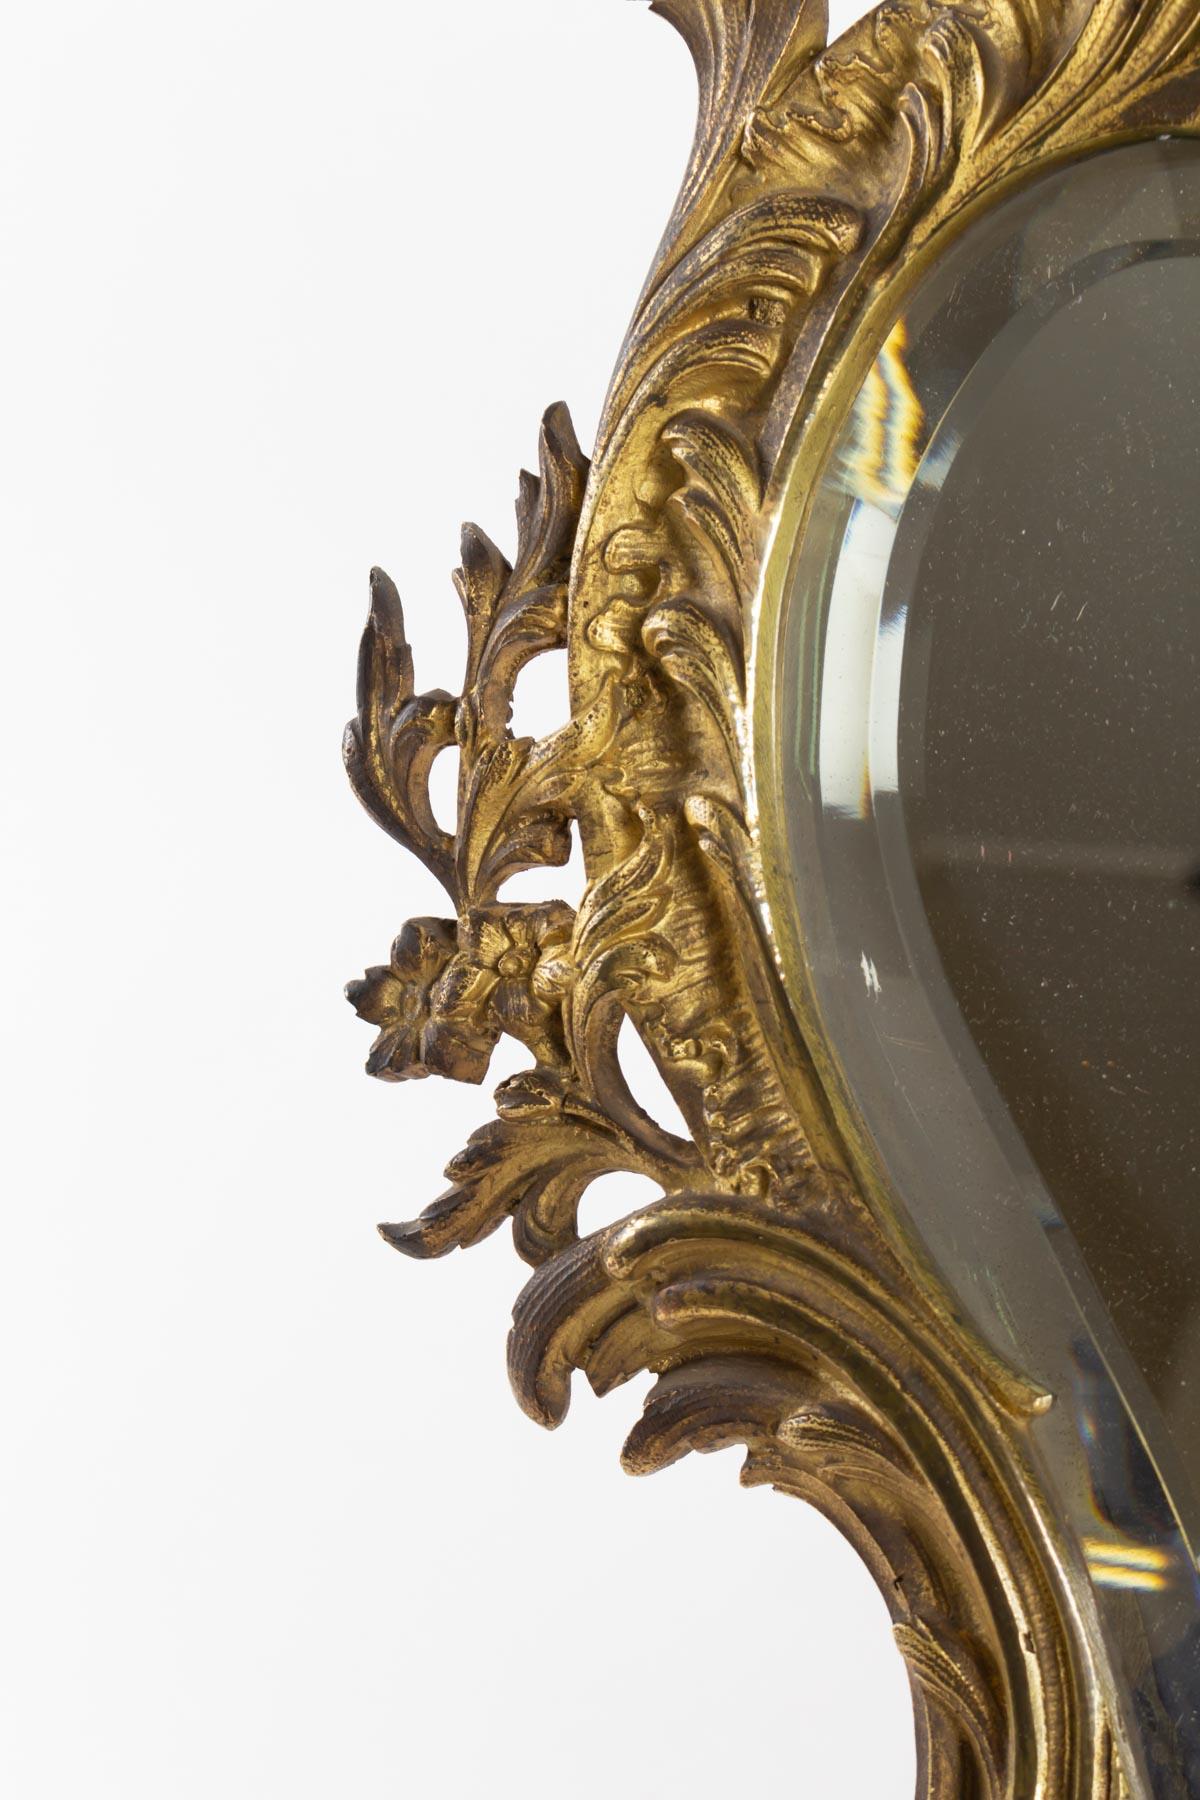 Table mirror that can be hung on the wall in gilt bronze with dragon decoration and rococo scrolls,
circa 1880.
Measures: H 45 cm, W 32 cm, L 2 cm.